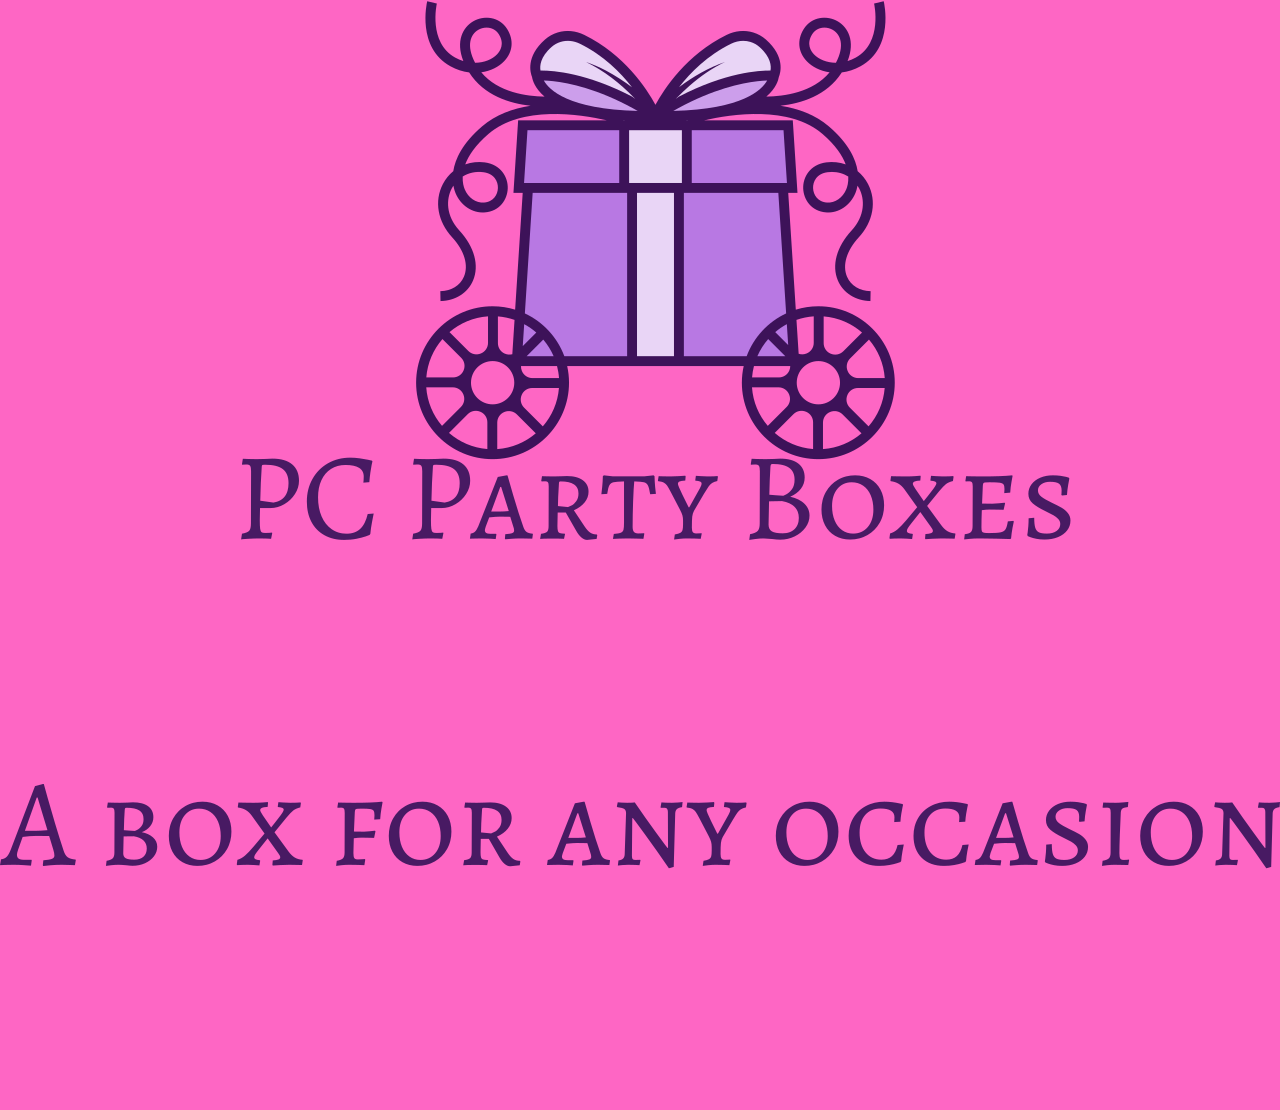 PC Party Boxes

A box for any occasion 's logo